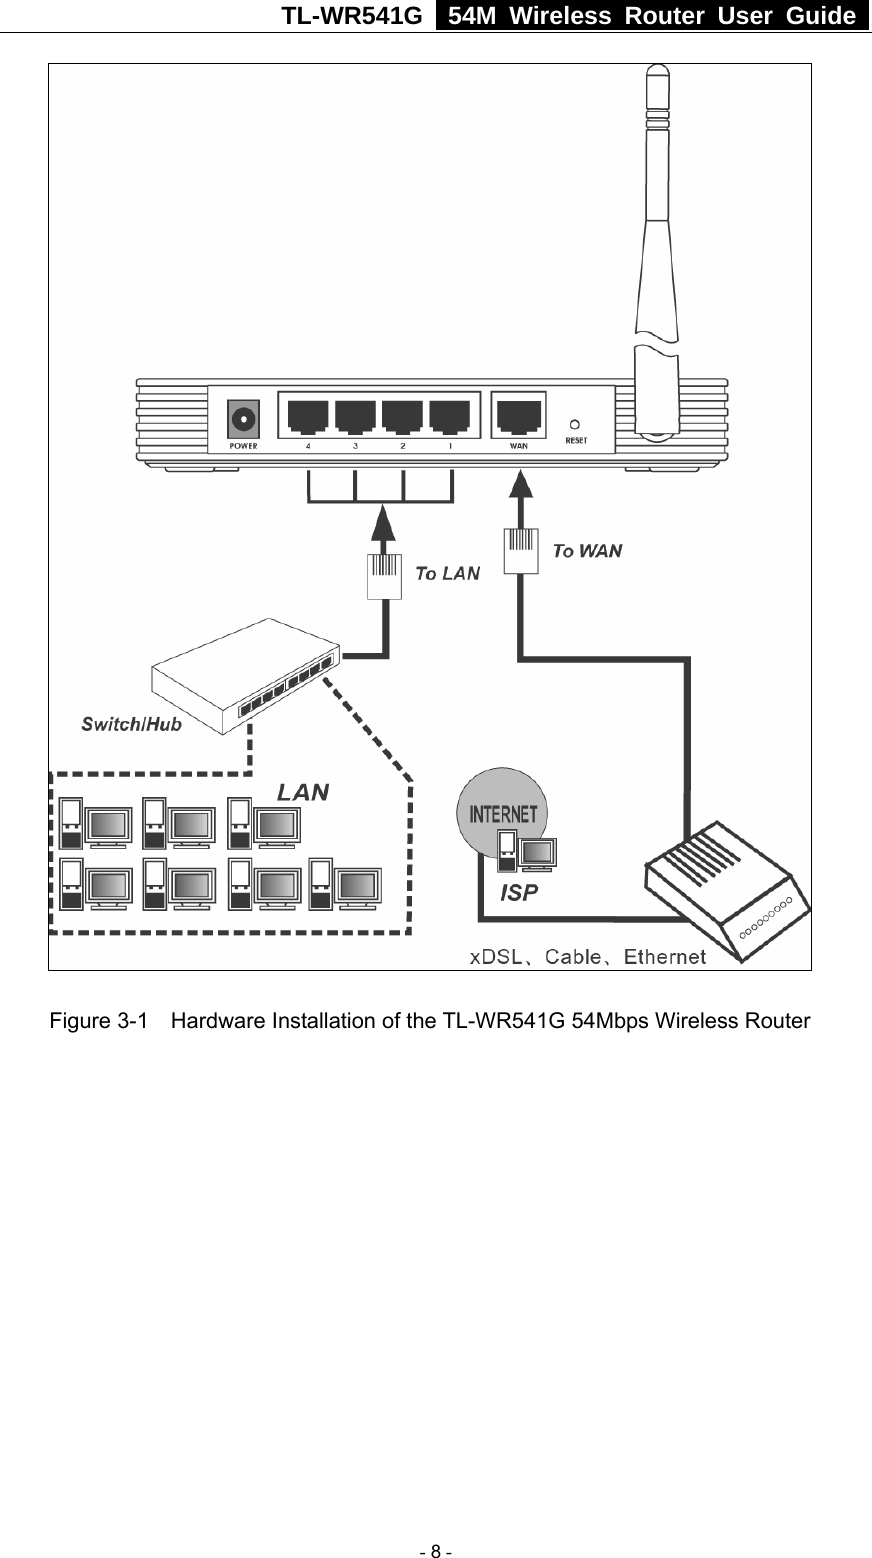 TL-WR541G   54M Wireless Router User Guide    Figure 3-1    Hardware Installation of the TL-WR541G 54Mbps Wireless Router  - 8 - 